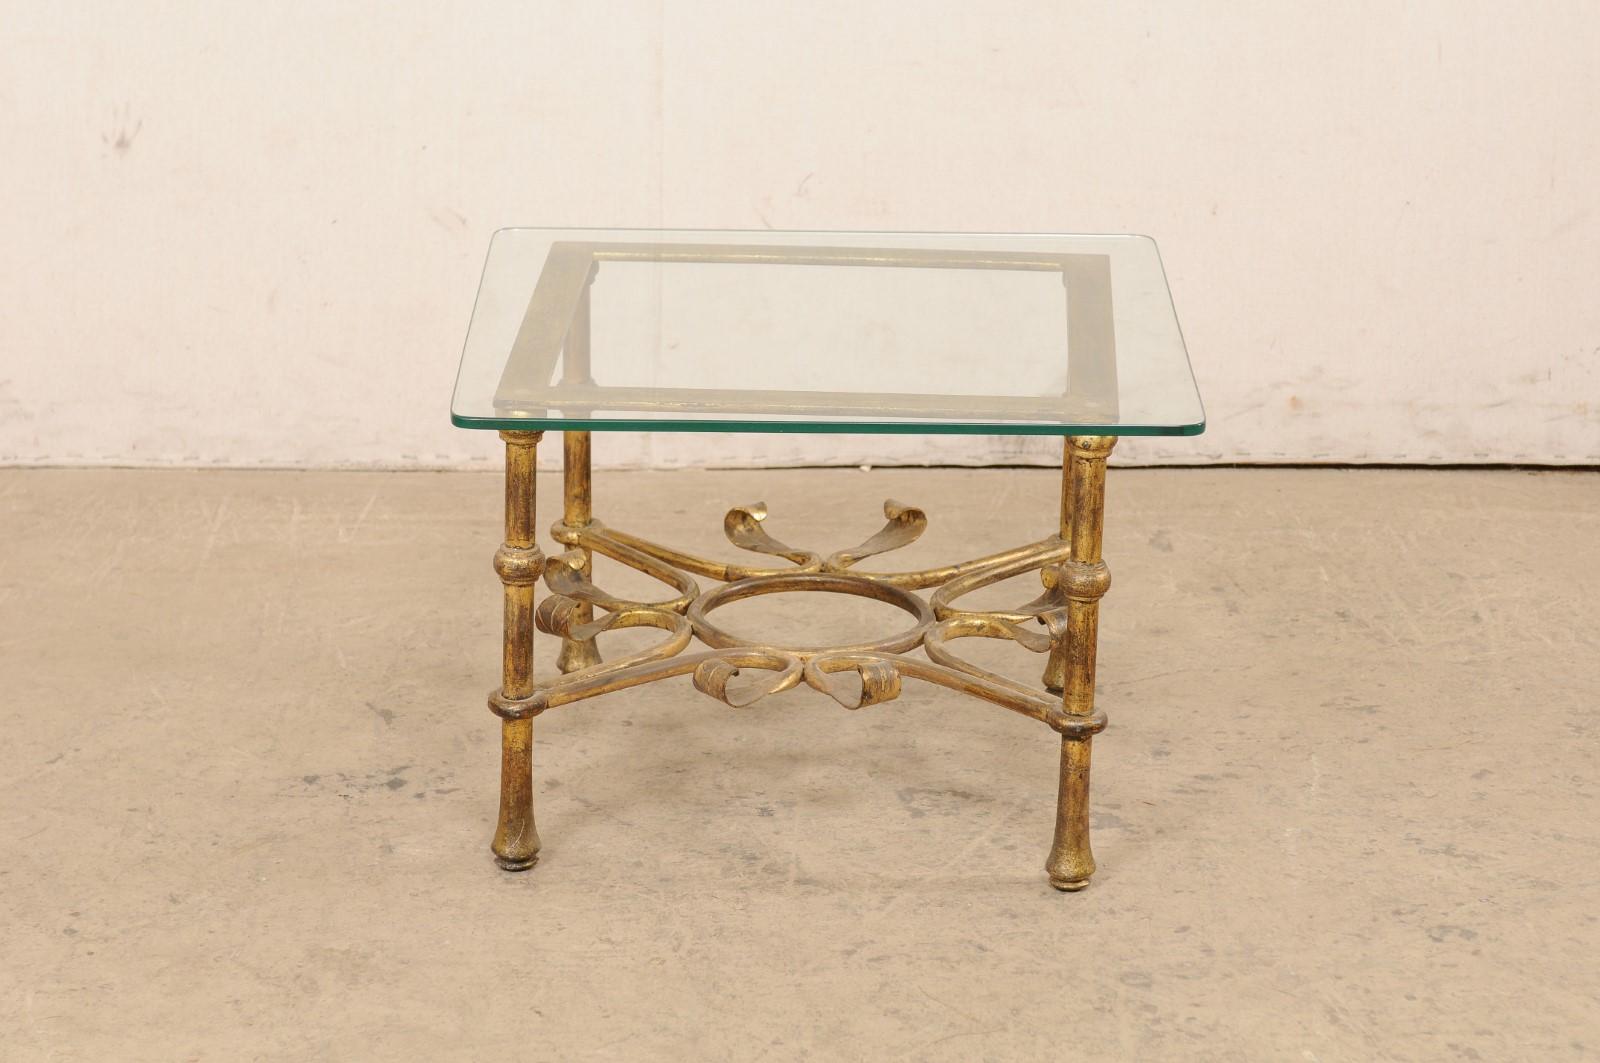 Spanish Accent Table with Gilt Iron Base & Square-Shaped Glass Top, Mid 20th C. For Sale 7